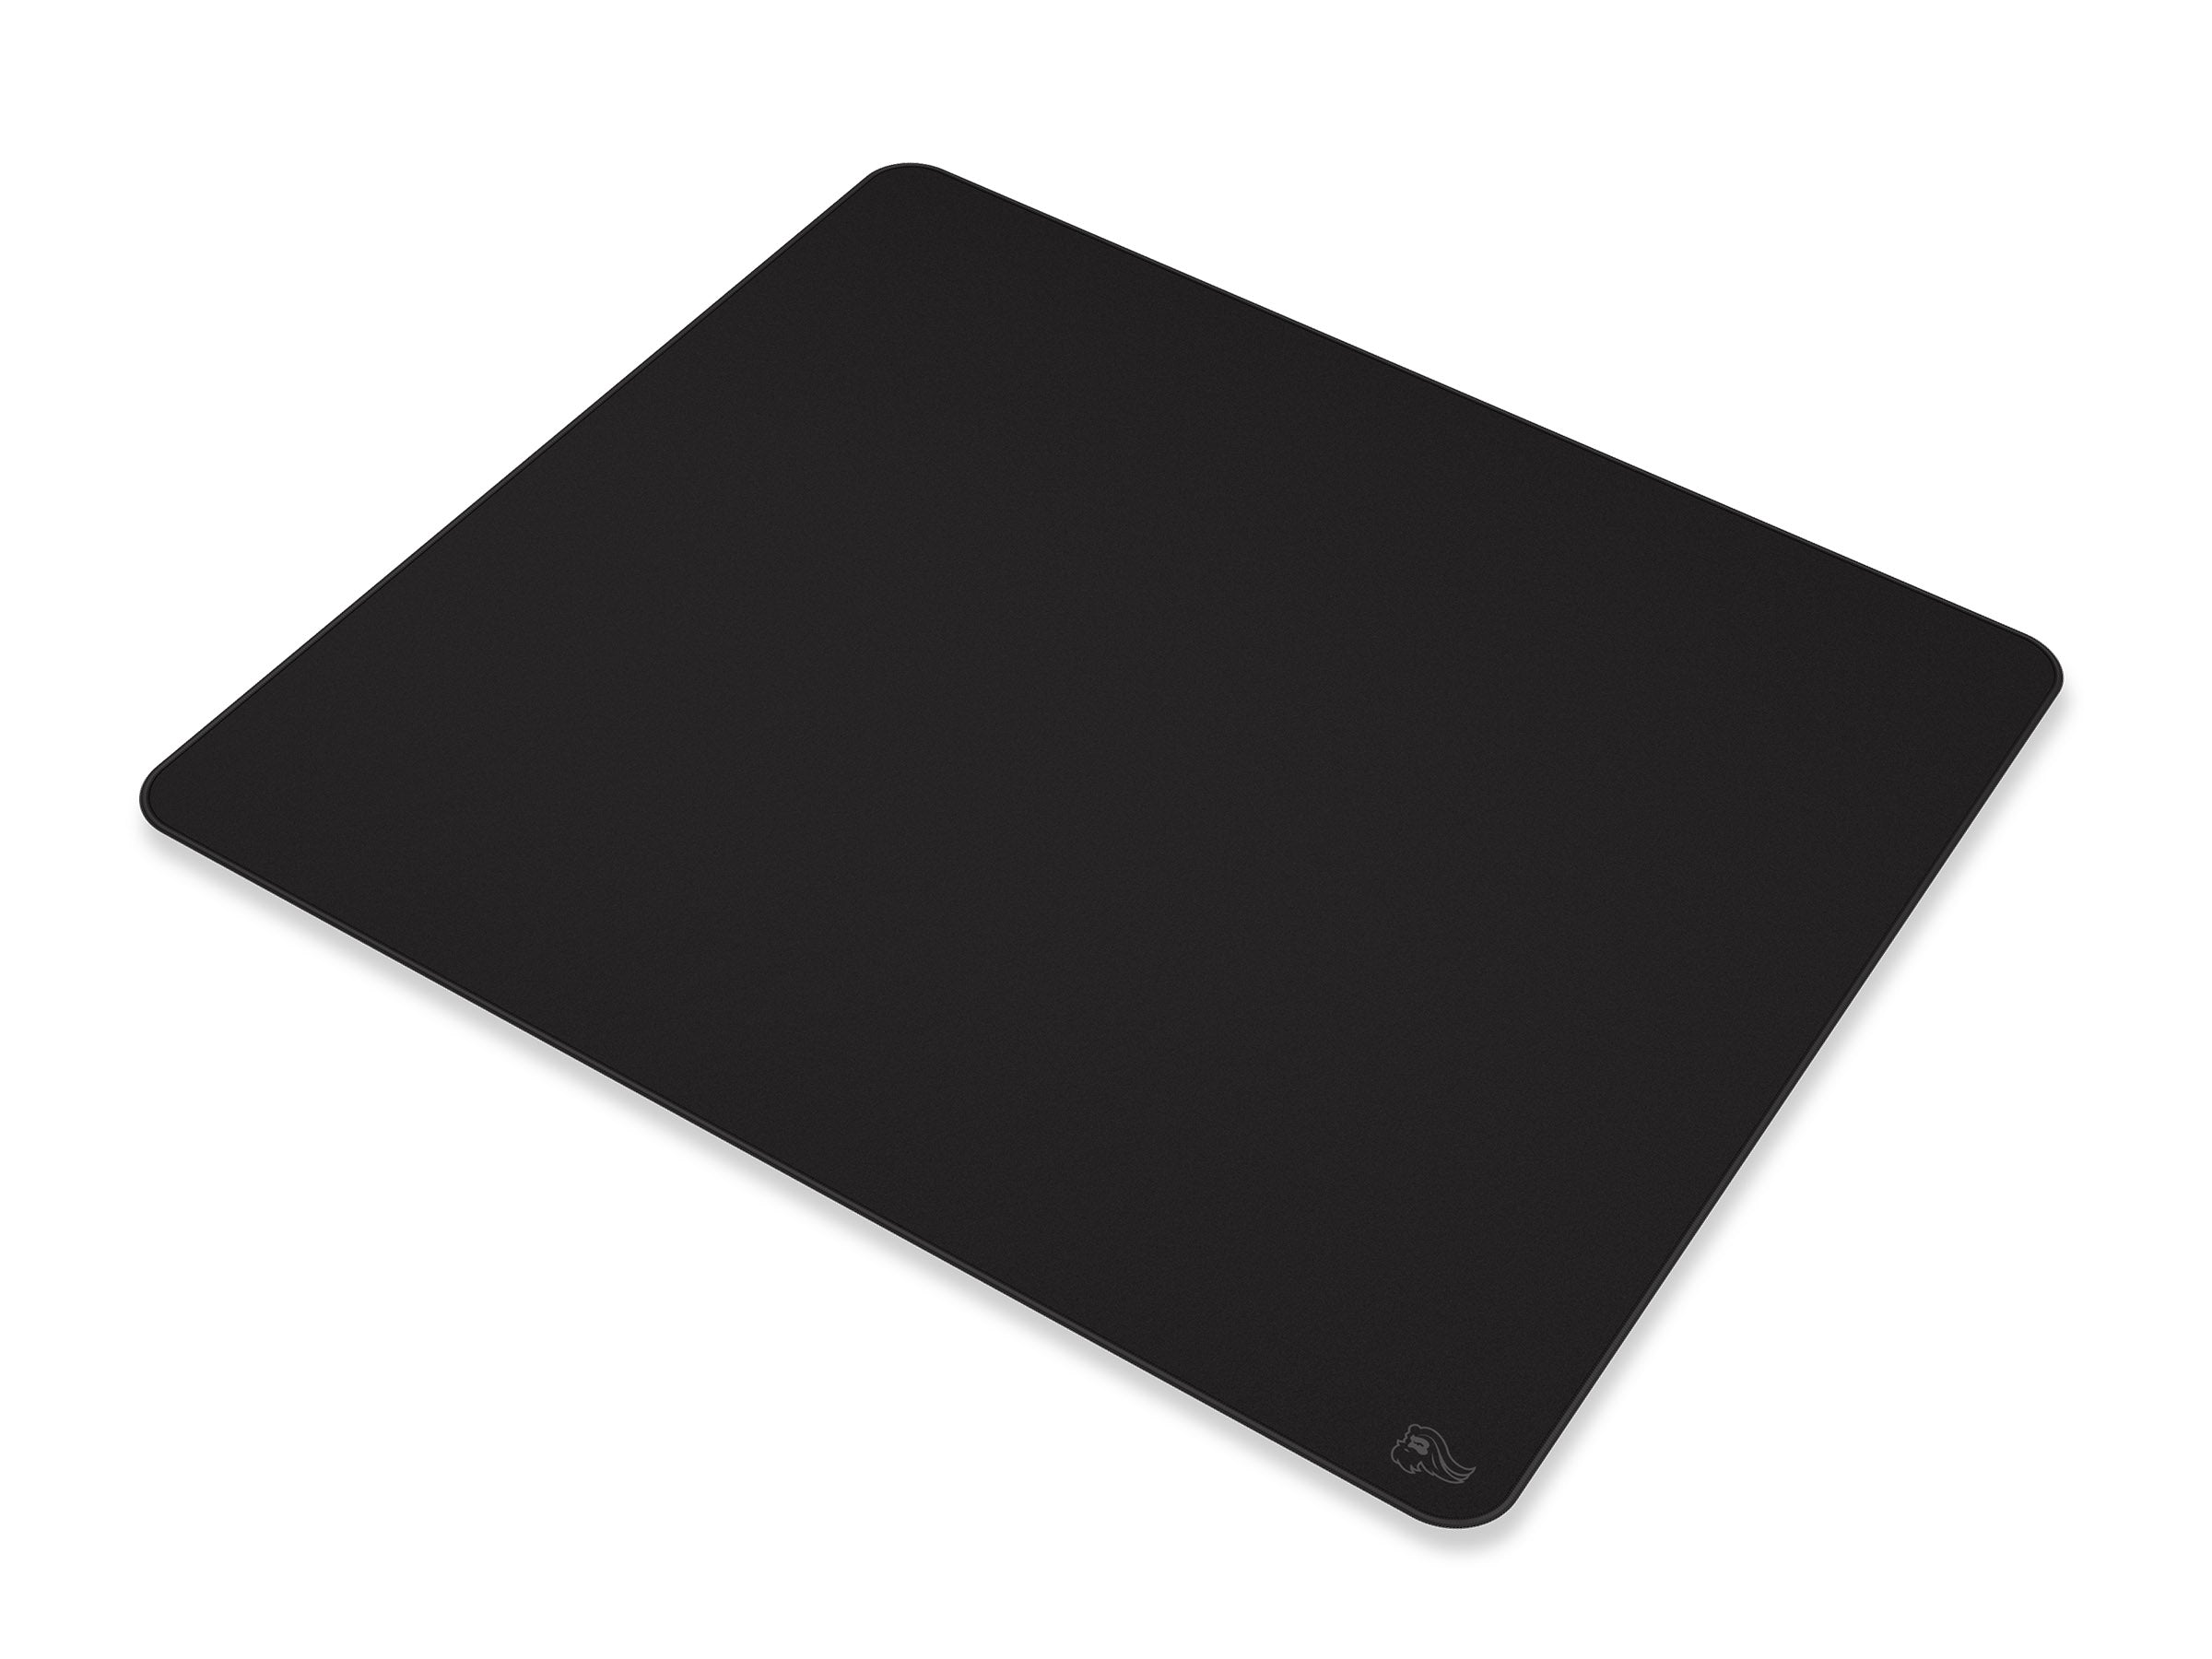 Glorious PC XL Stealth Desk / Mouse Pad MKFPFKFZ0I |27433|